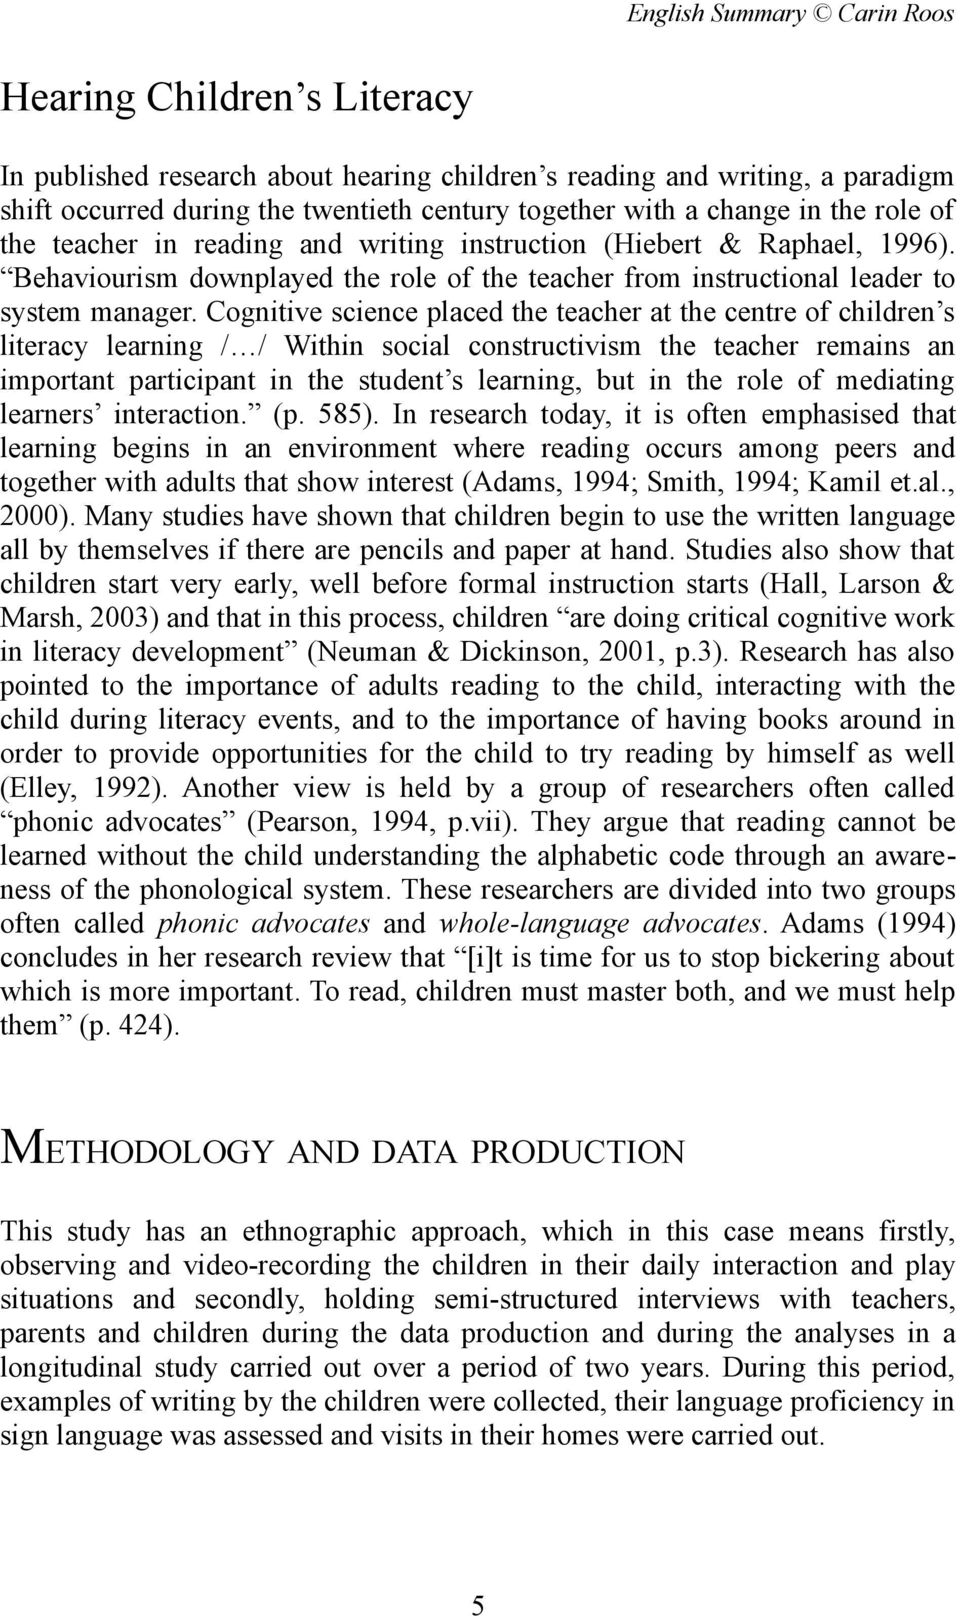 Cognitive science placed the teacher at the centre of children s literacy learning / / Within social constructivism the teacher remains an important participant in the student s learning, but in the